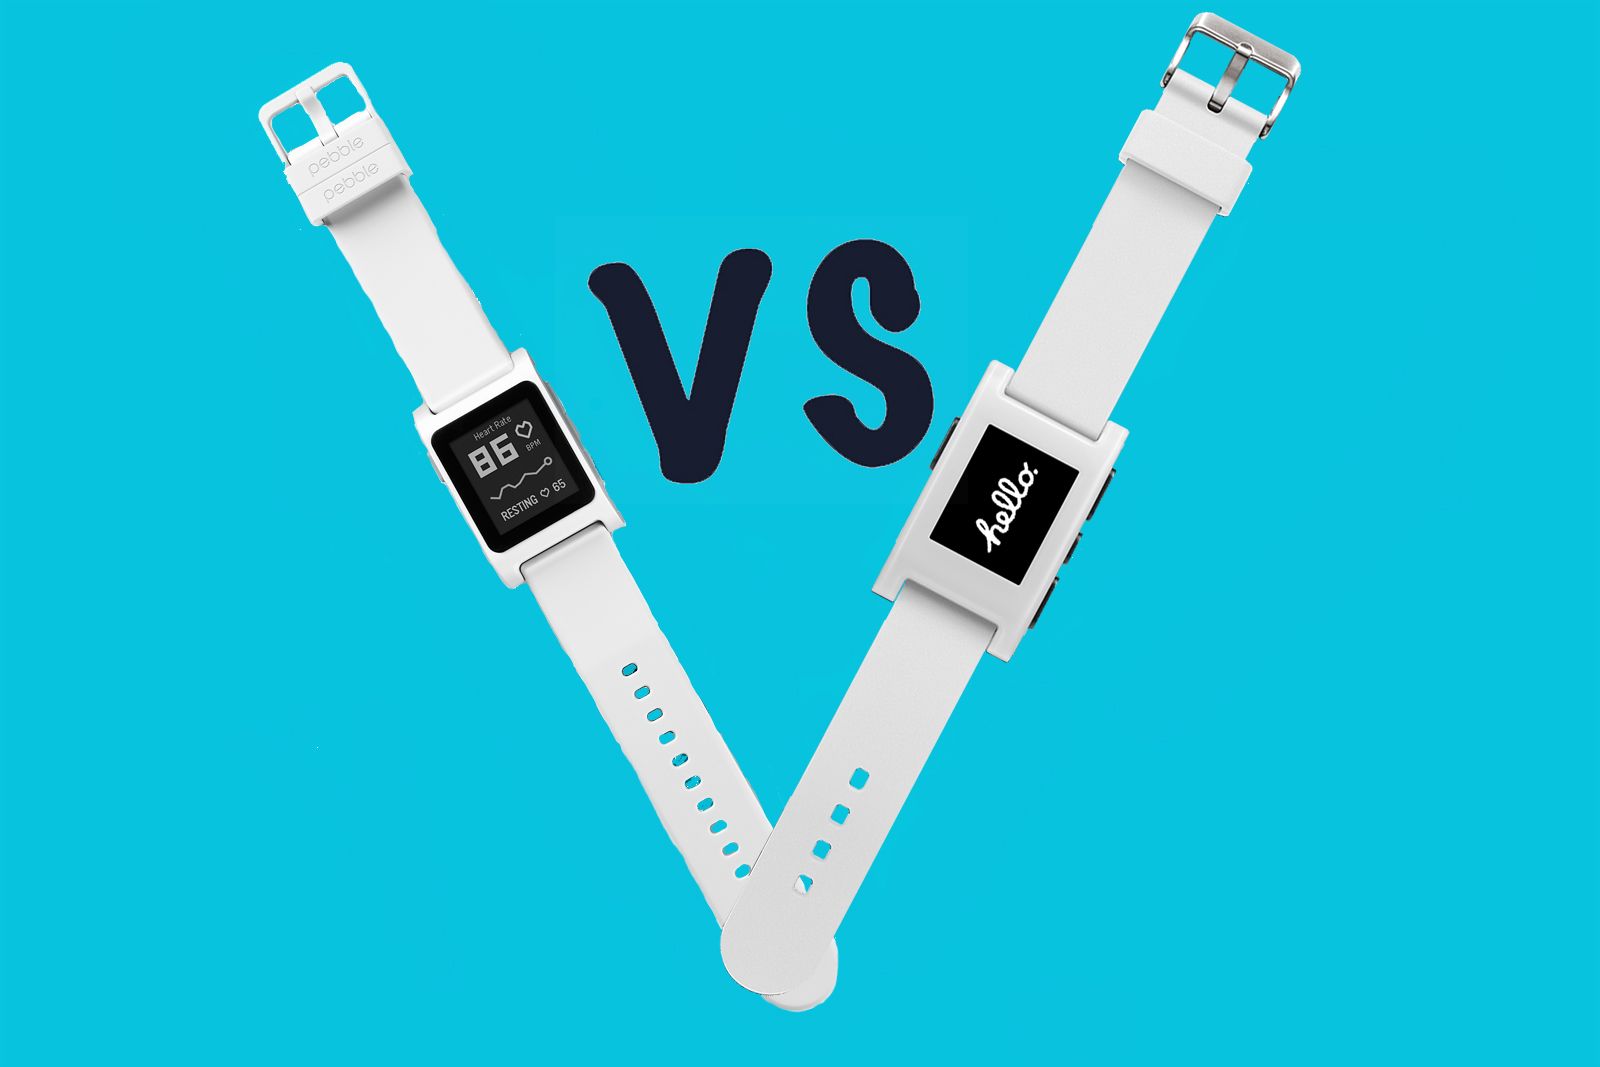 pebble 2 vs pebble classic what s the difference  image 1